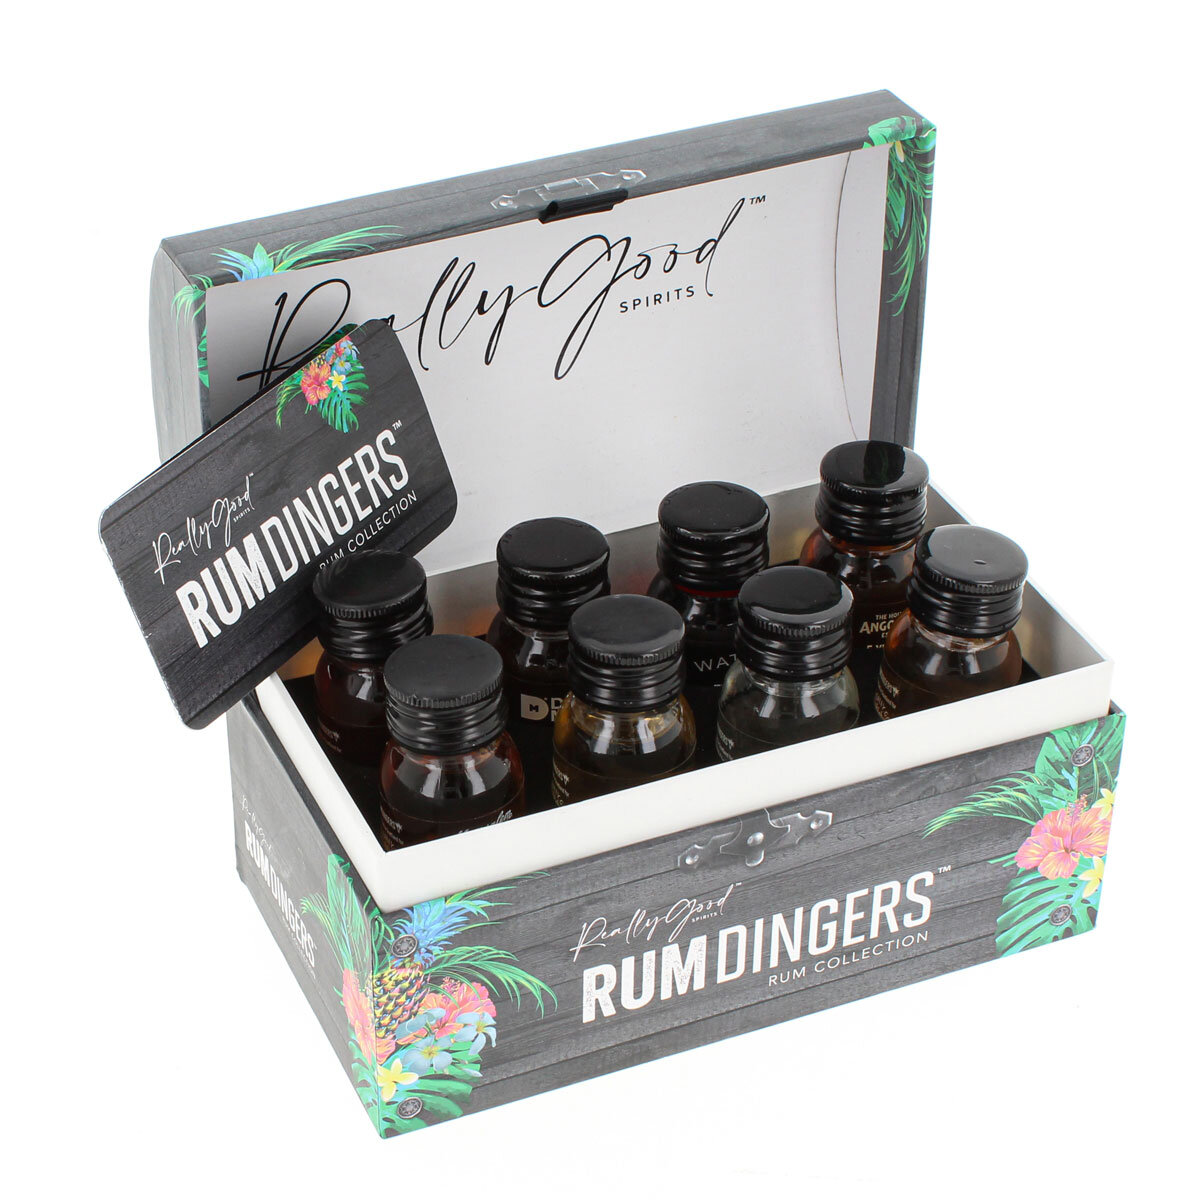 Really Good Spirits Rum Dingers Rum Collection